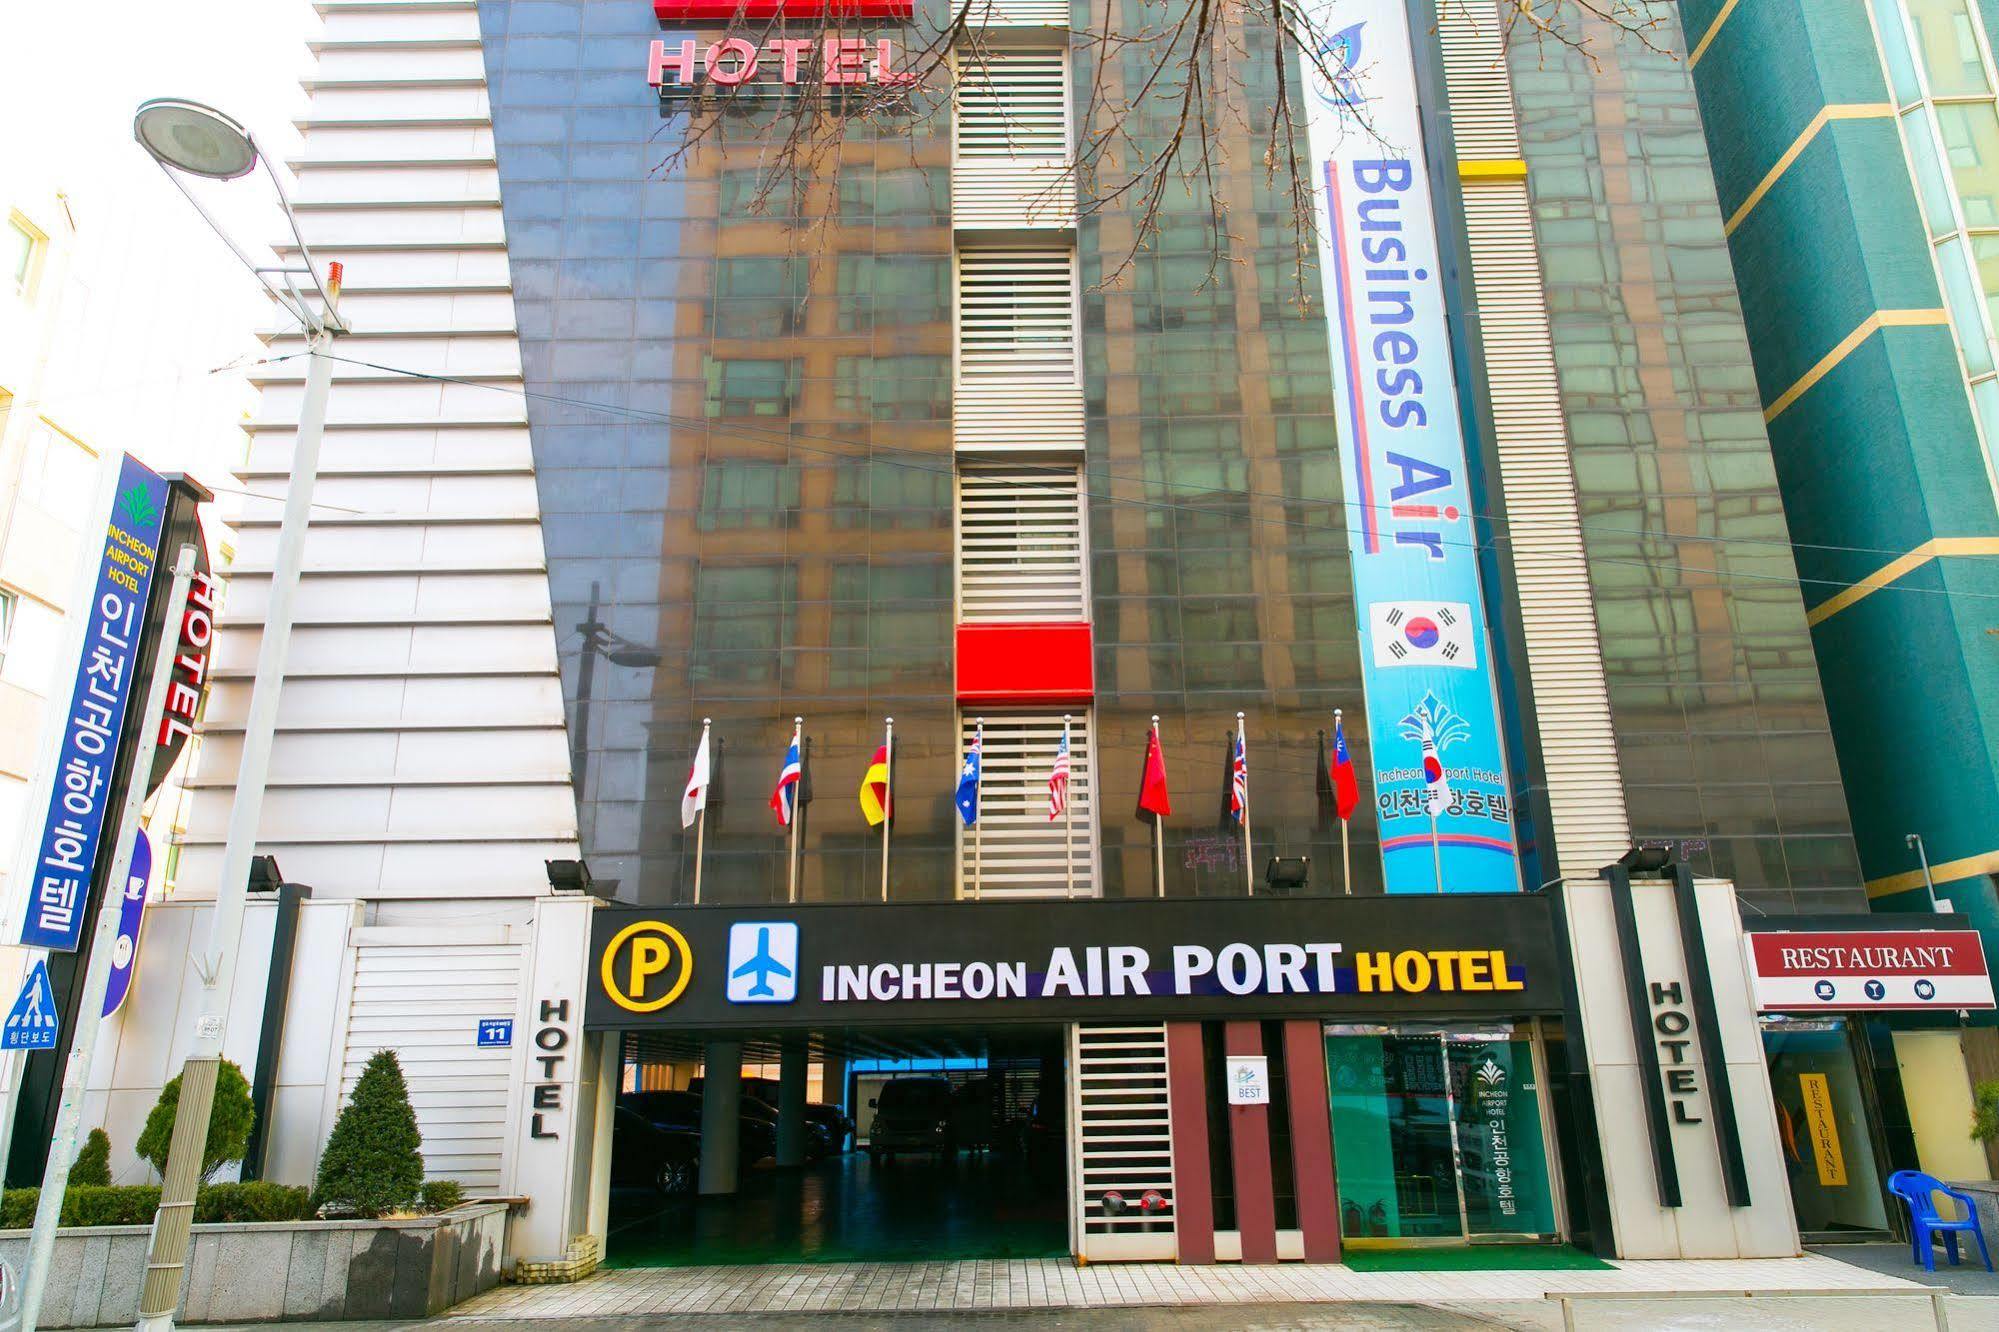 Paradise City at Incheon Aiport: South Korea sets high bar in airport  hotels